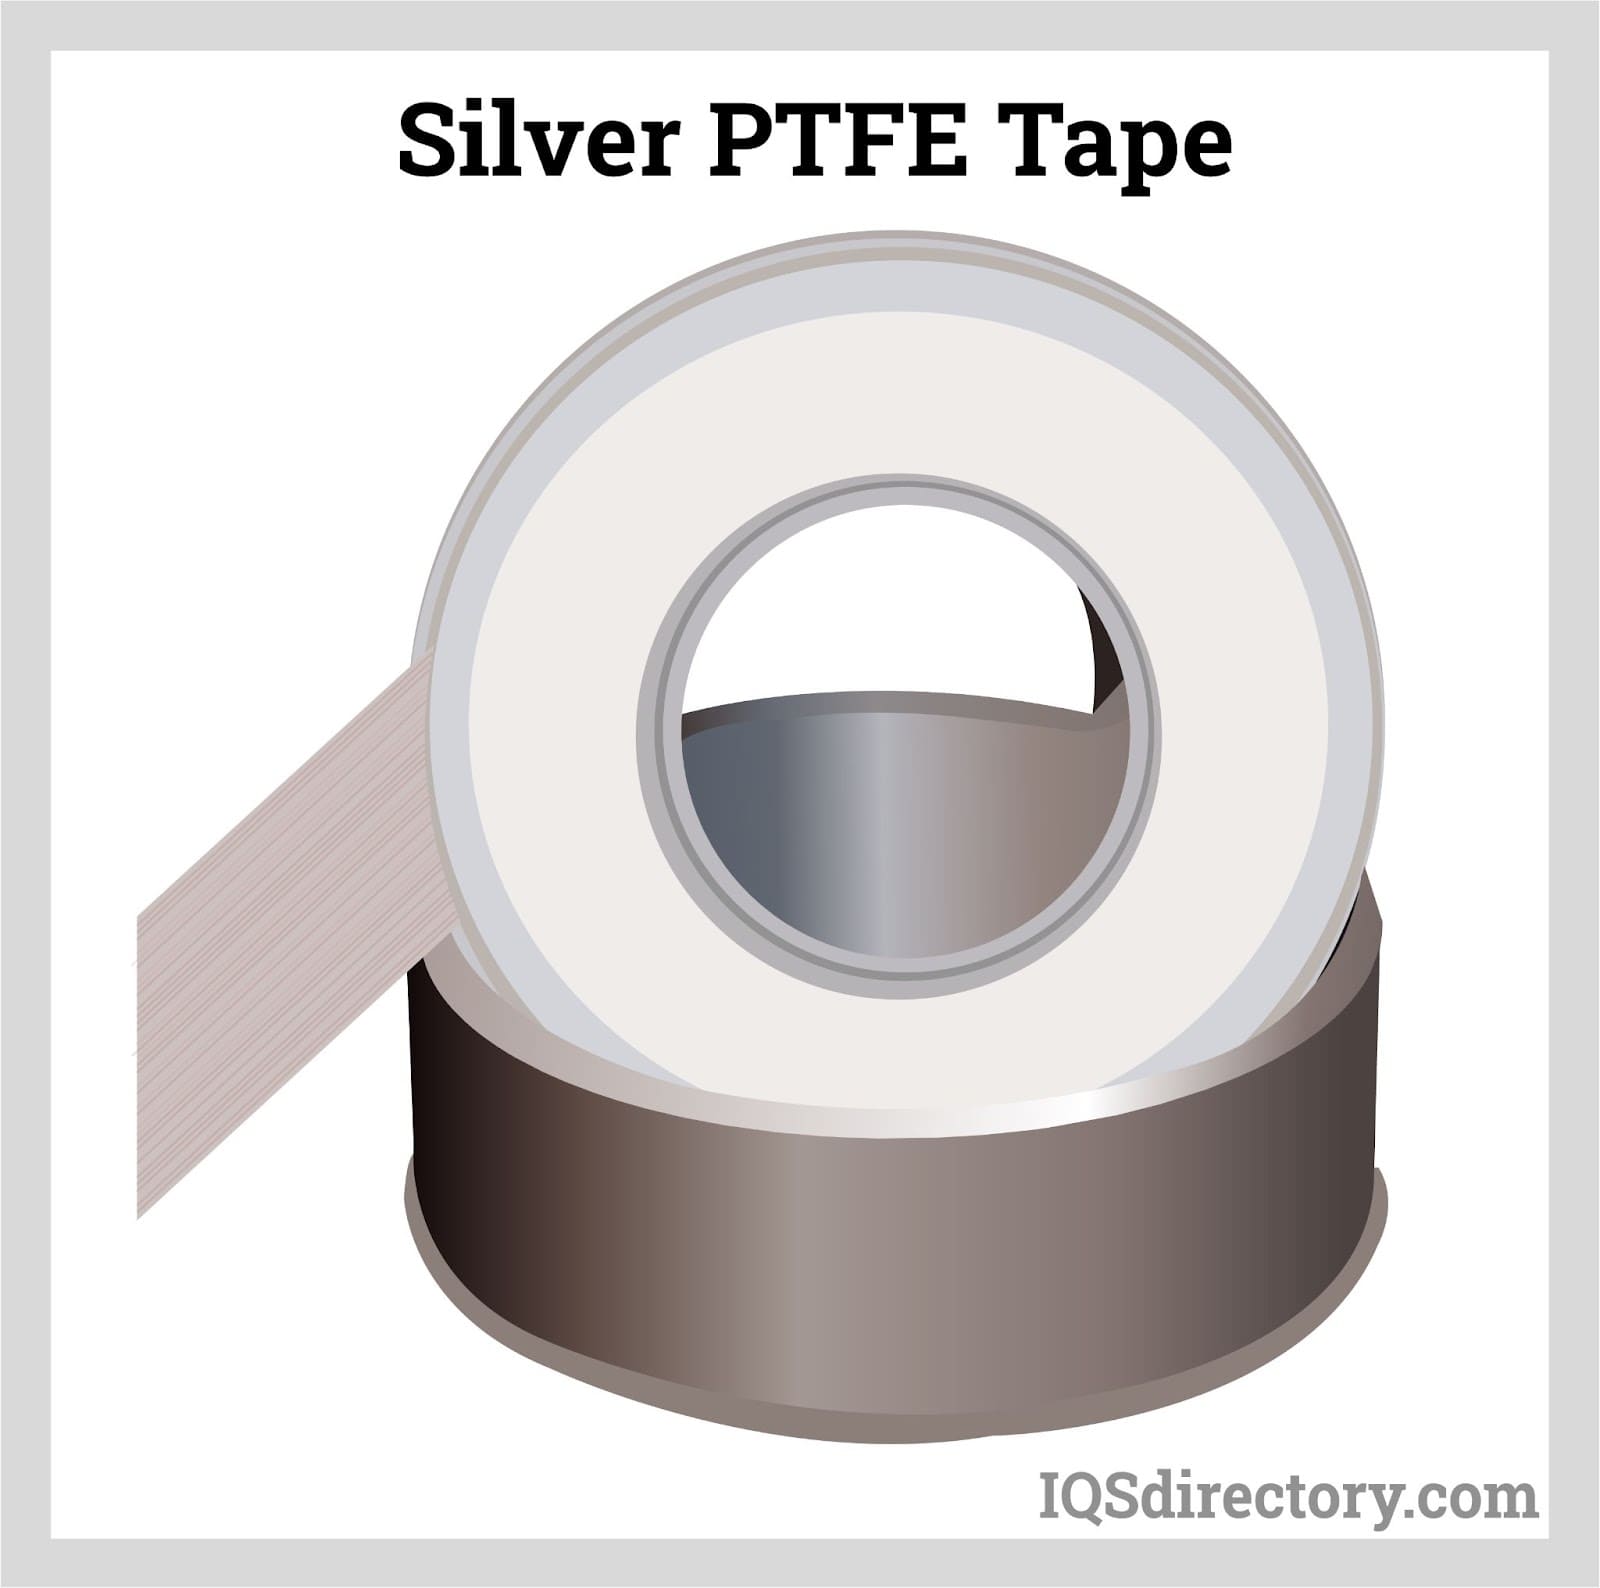 PTFE Types of tape, Uses/Applications, Features and Benefits